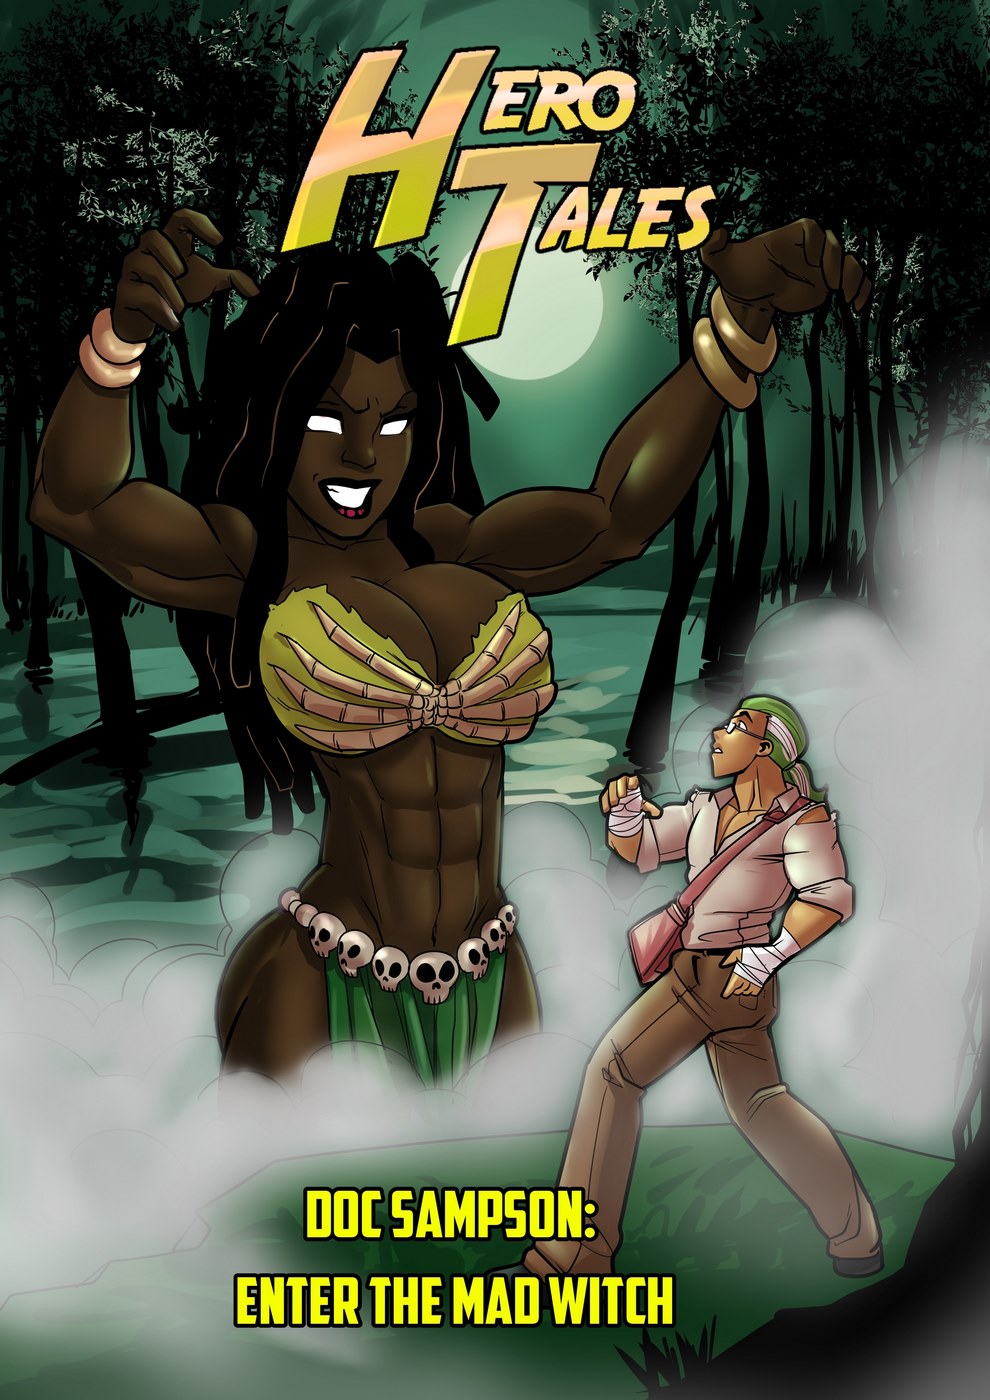 Porn Comics - Hero Tales #2- Enter the Mad Witch porn comics 8 muses